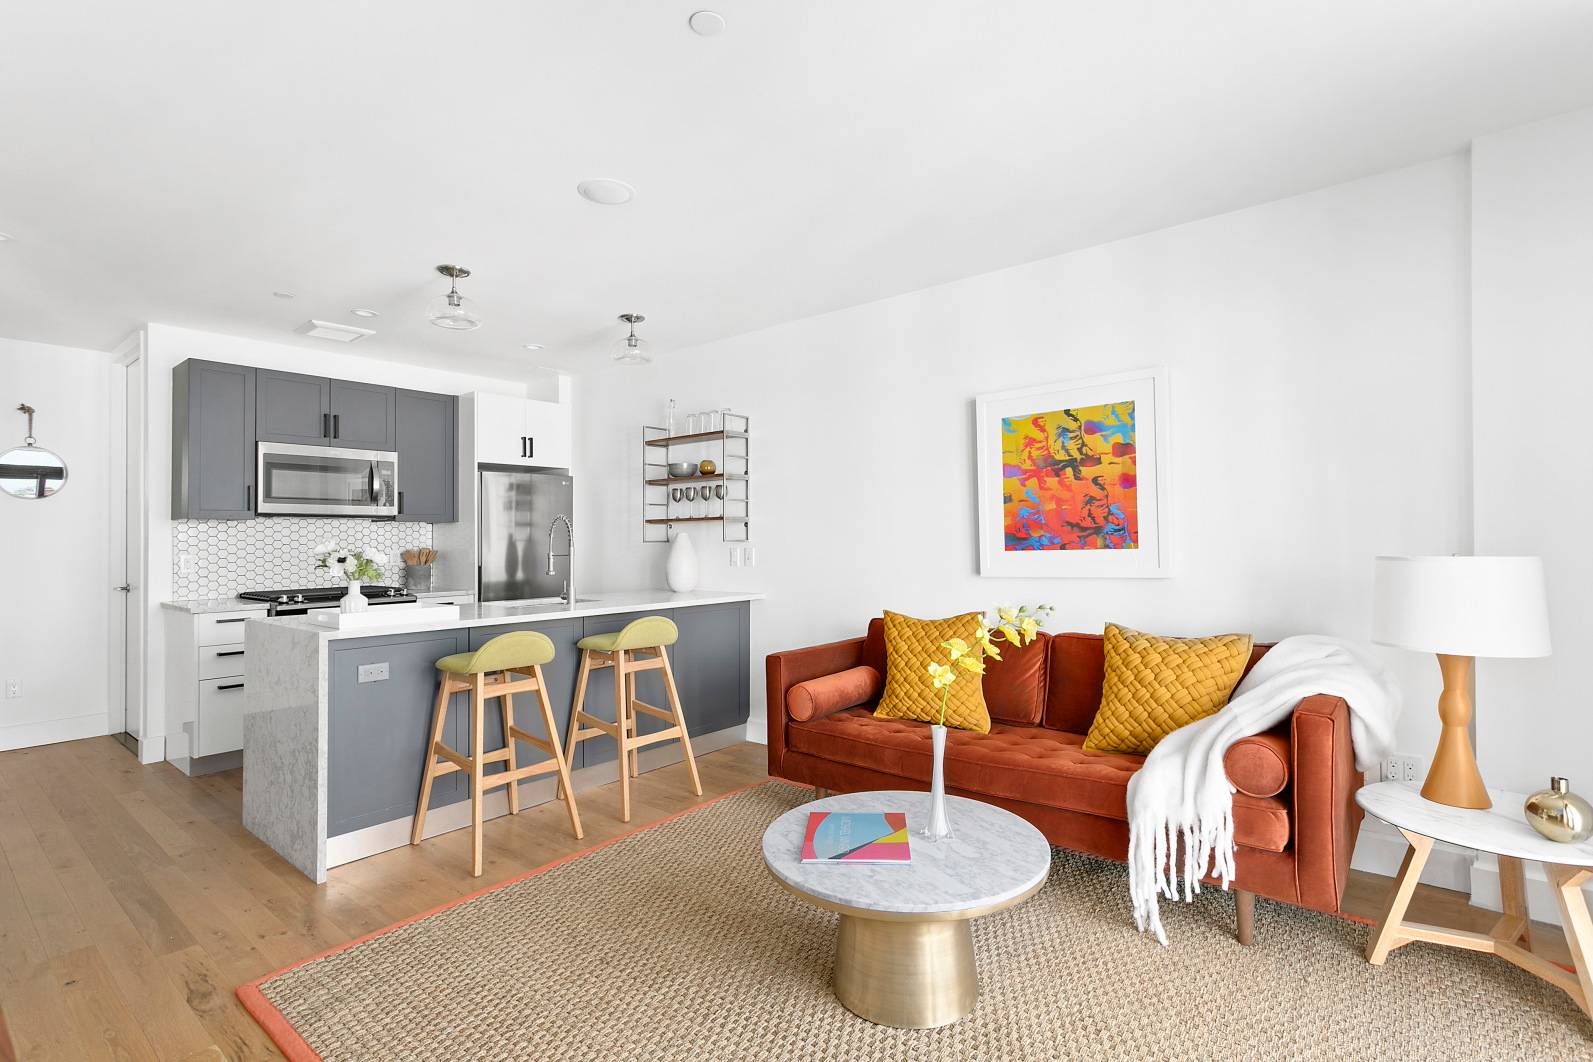 364 Harman Street Unit 3D is a 1 Bed Experience the Harmony, a sixteen unit modern amp ; sleek boutique elevator condominium located off of Wyckoff Ave in the heart ...